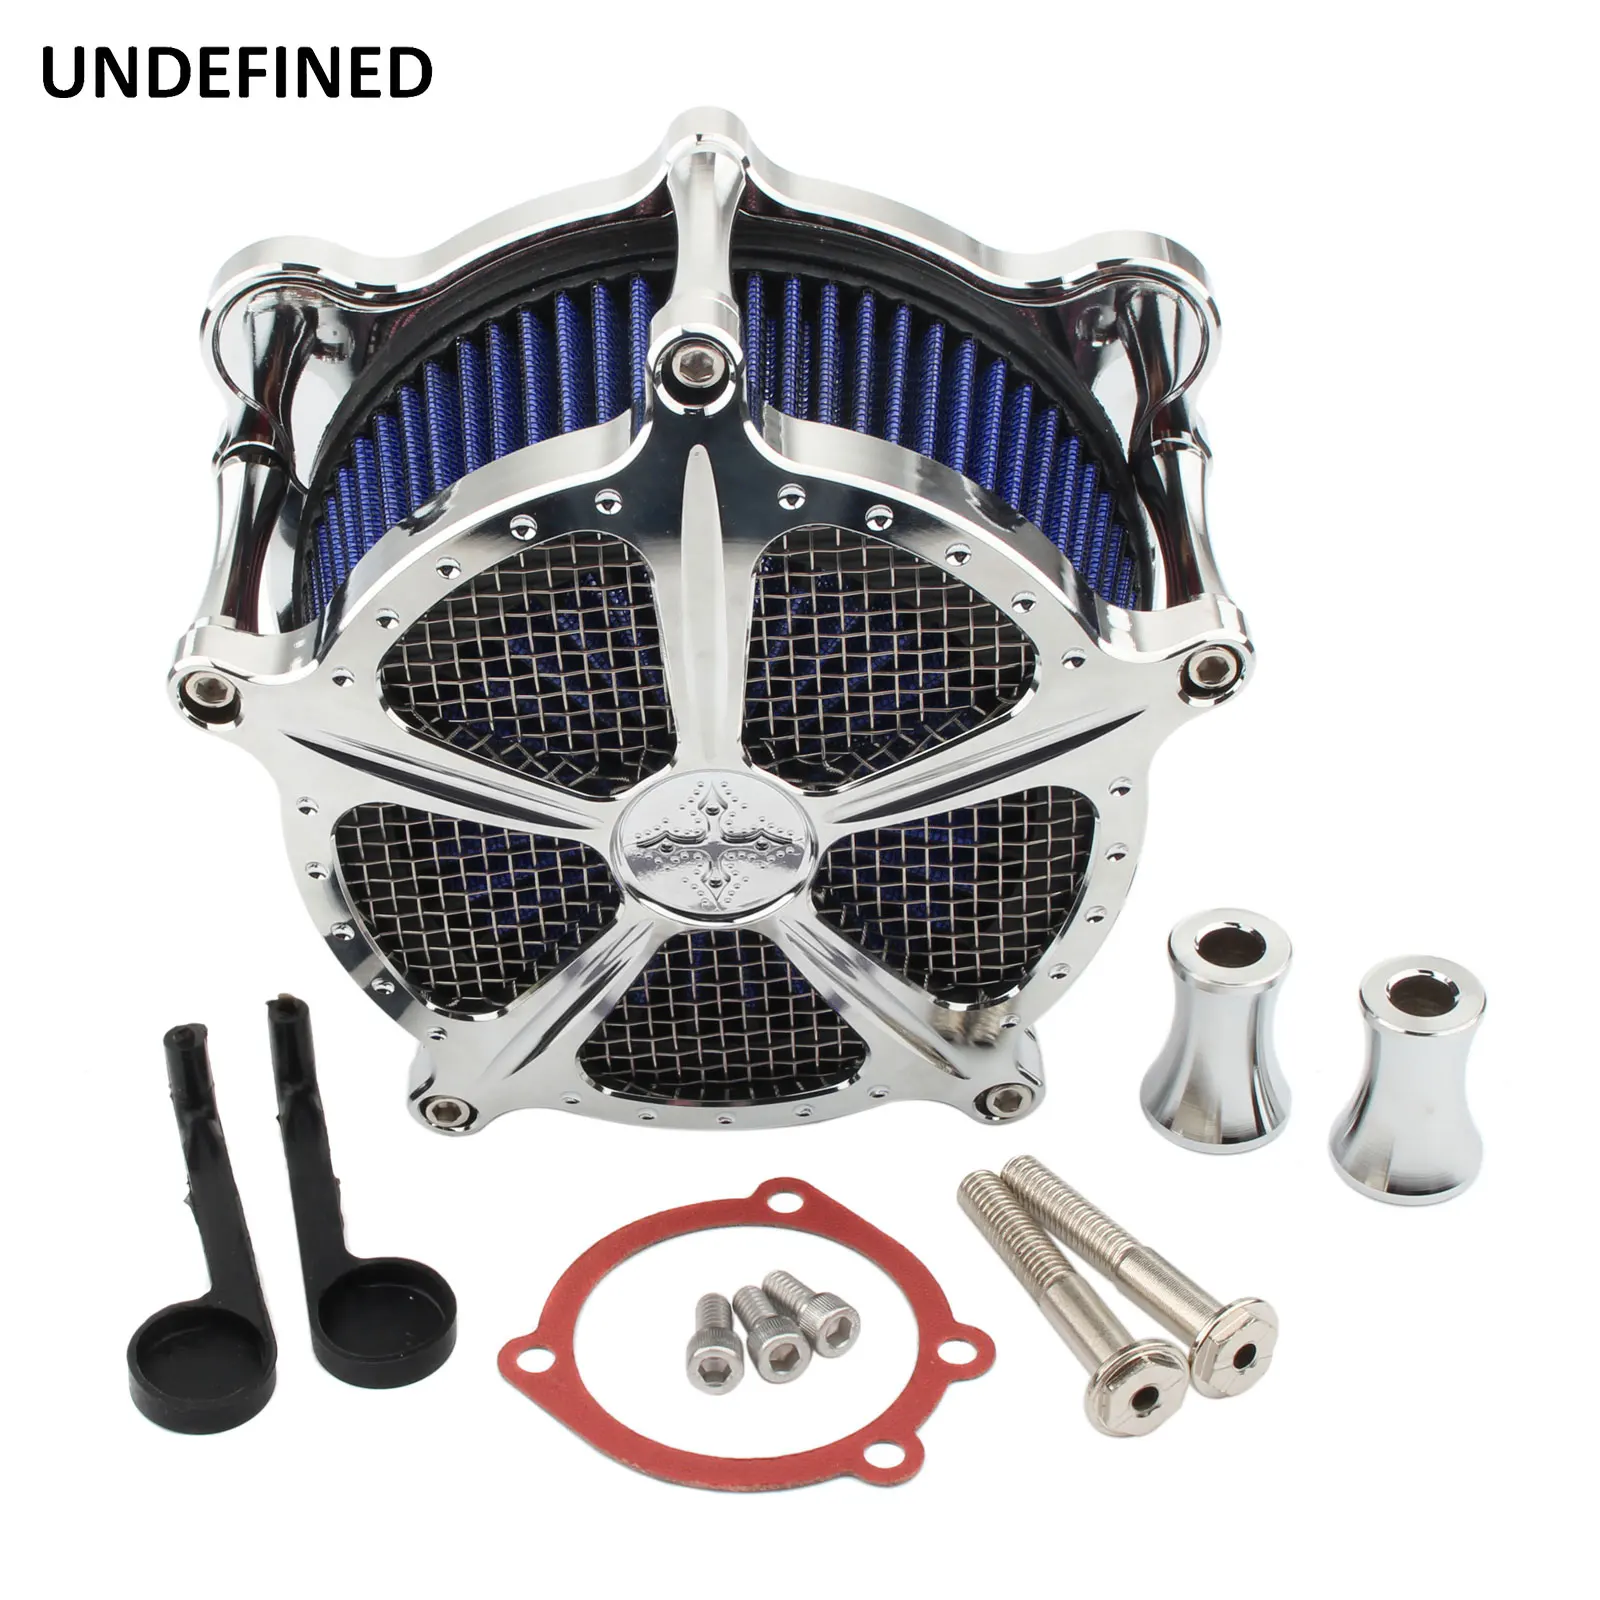 

Motorcycle Air Filter Cleaner Intake Kit Blue For Harley Softail Touring Road King Electra Glide Dyna FXR Street Bob Low Rider